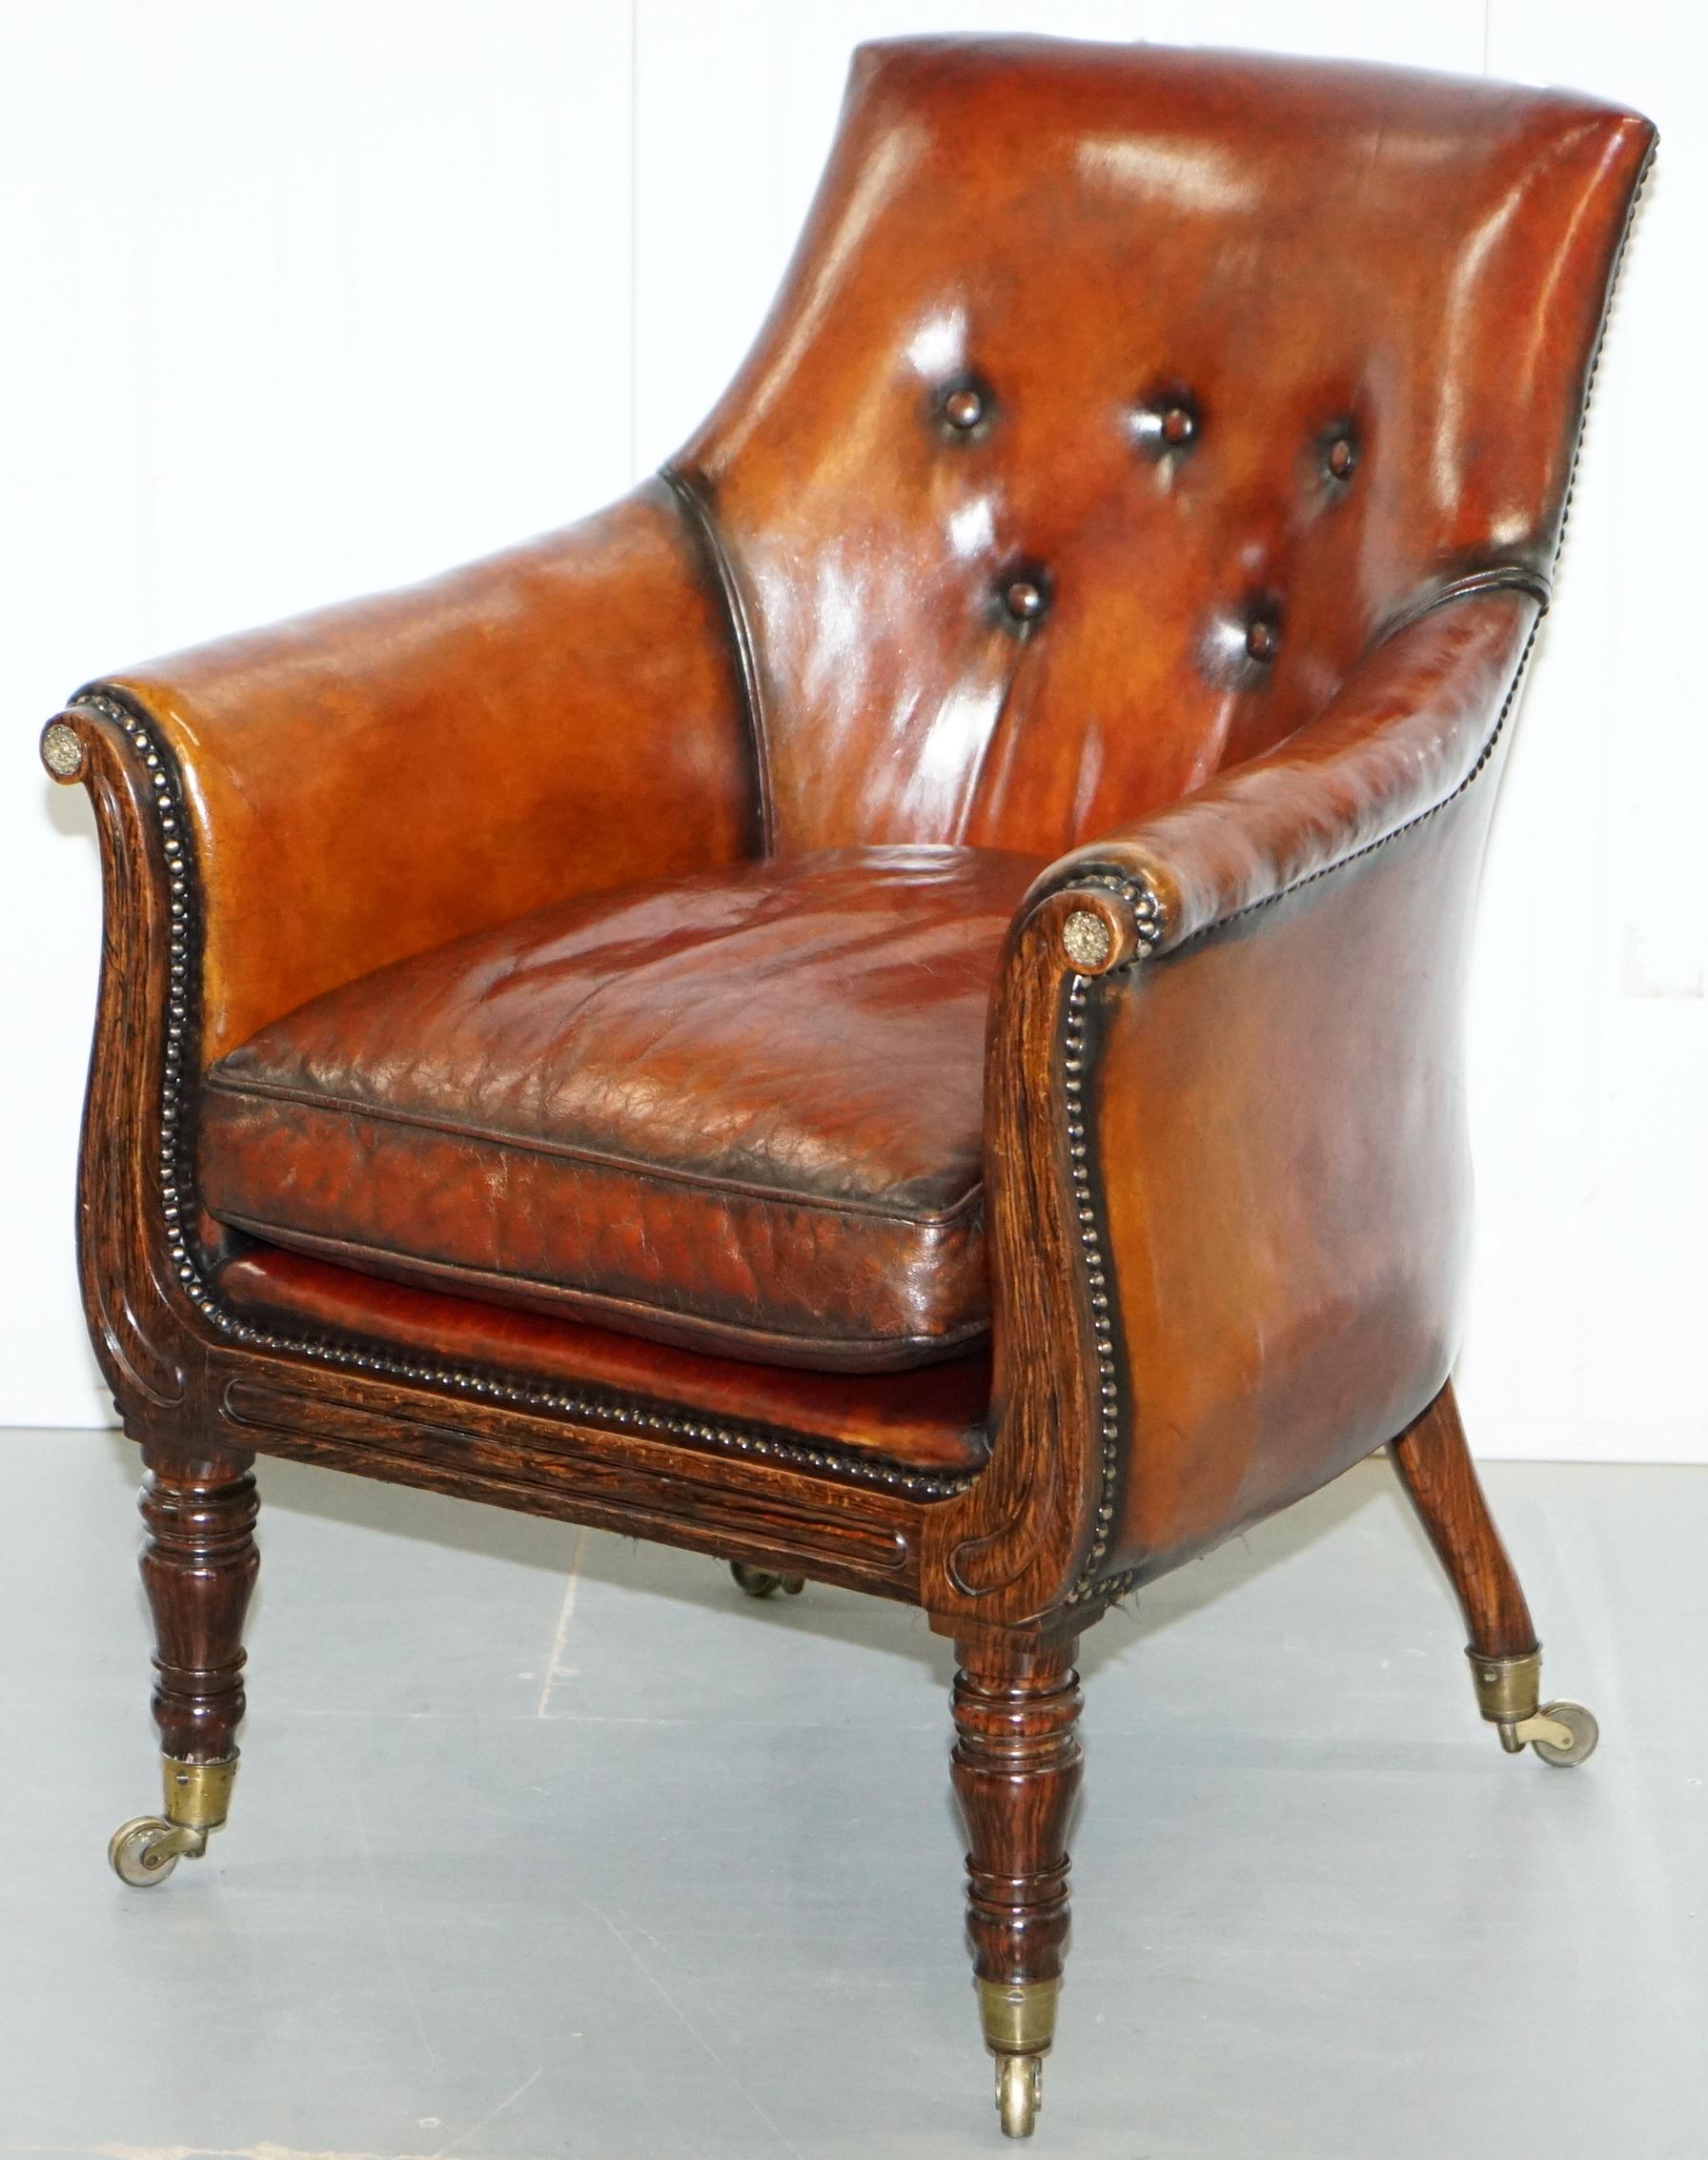 English Rare Attributed to Gillows Regency Armchair Hand Dyed Brown Leather Hand-Painted For Sale